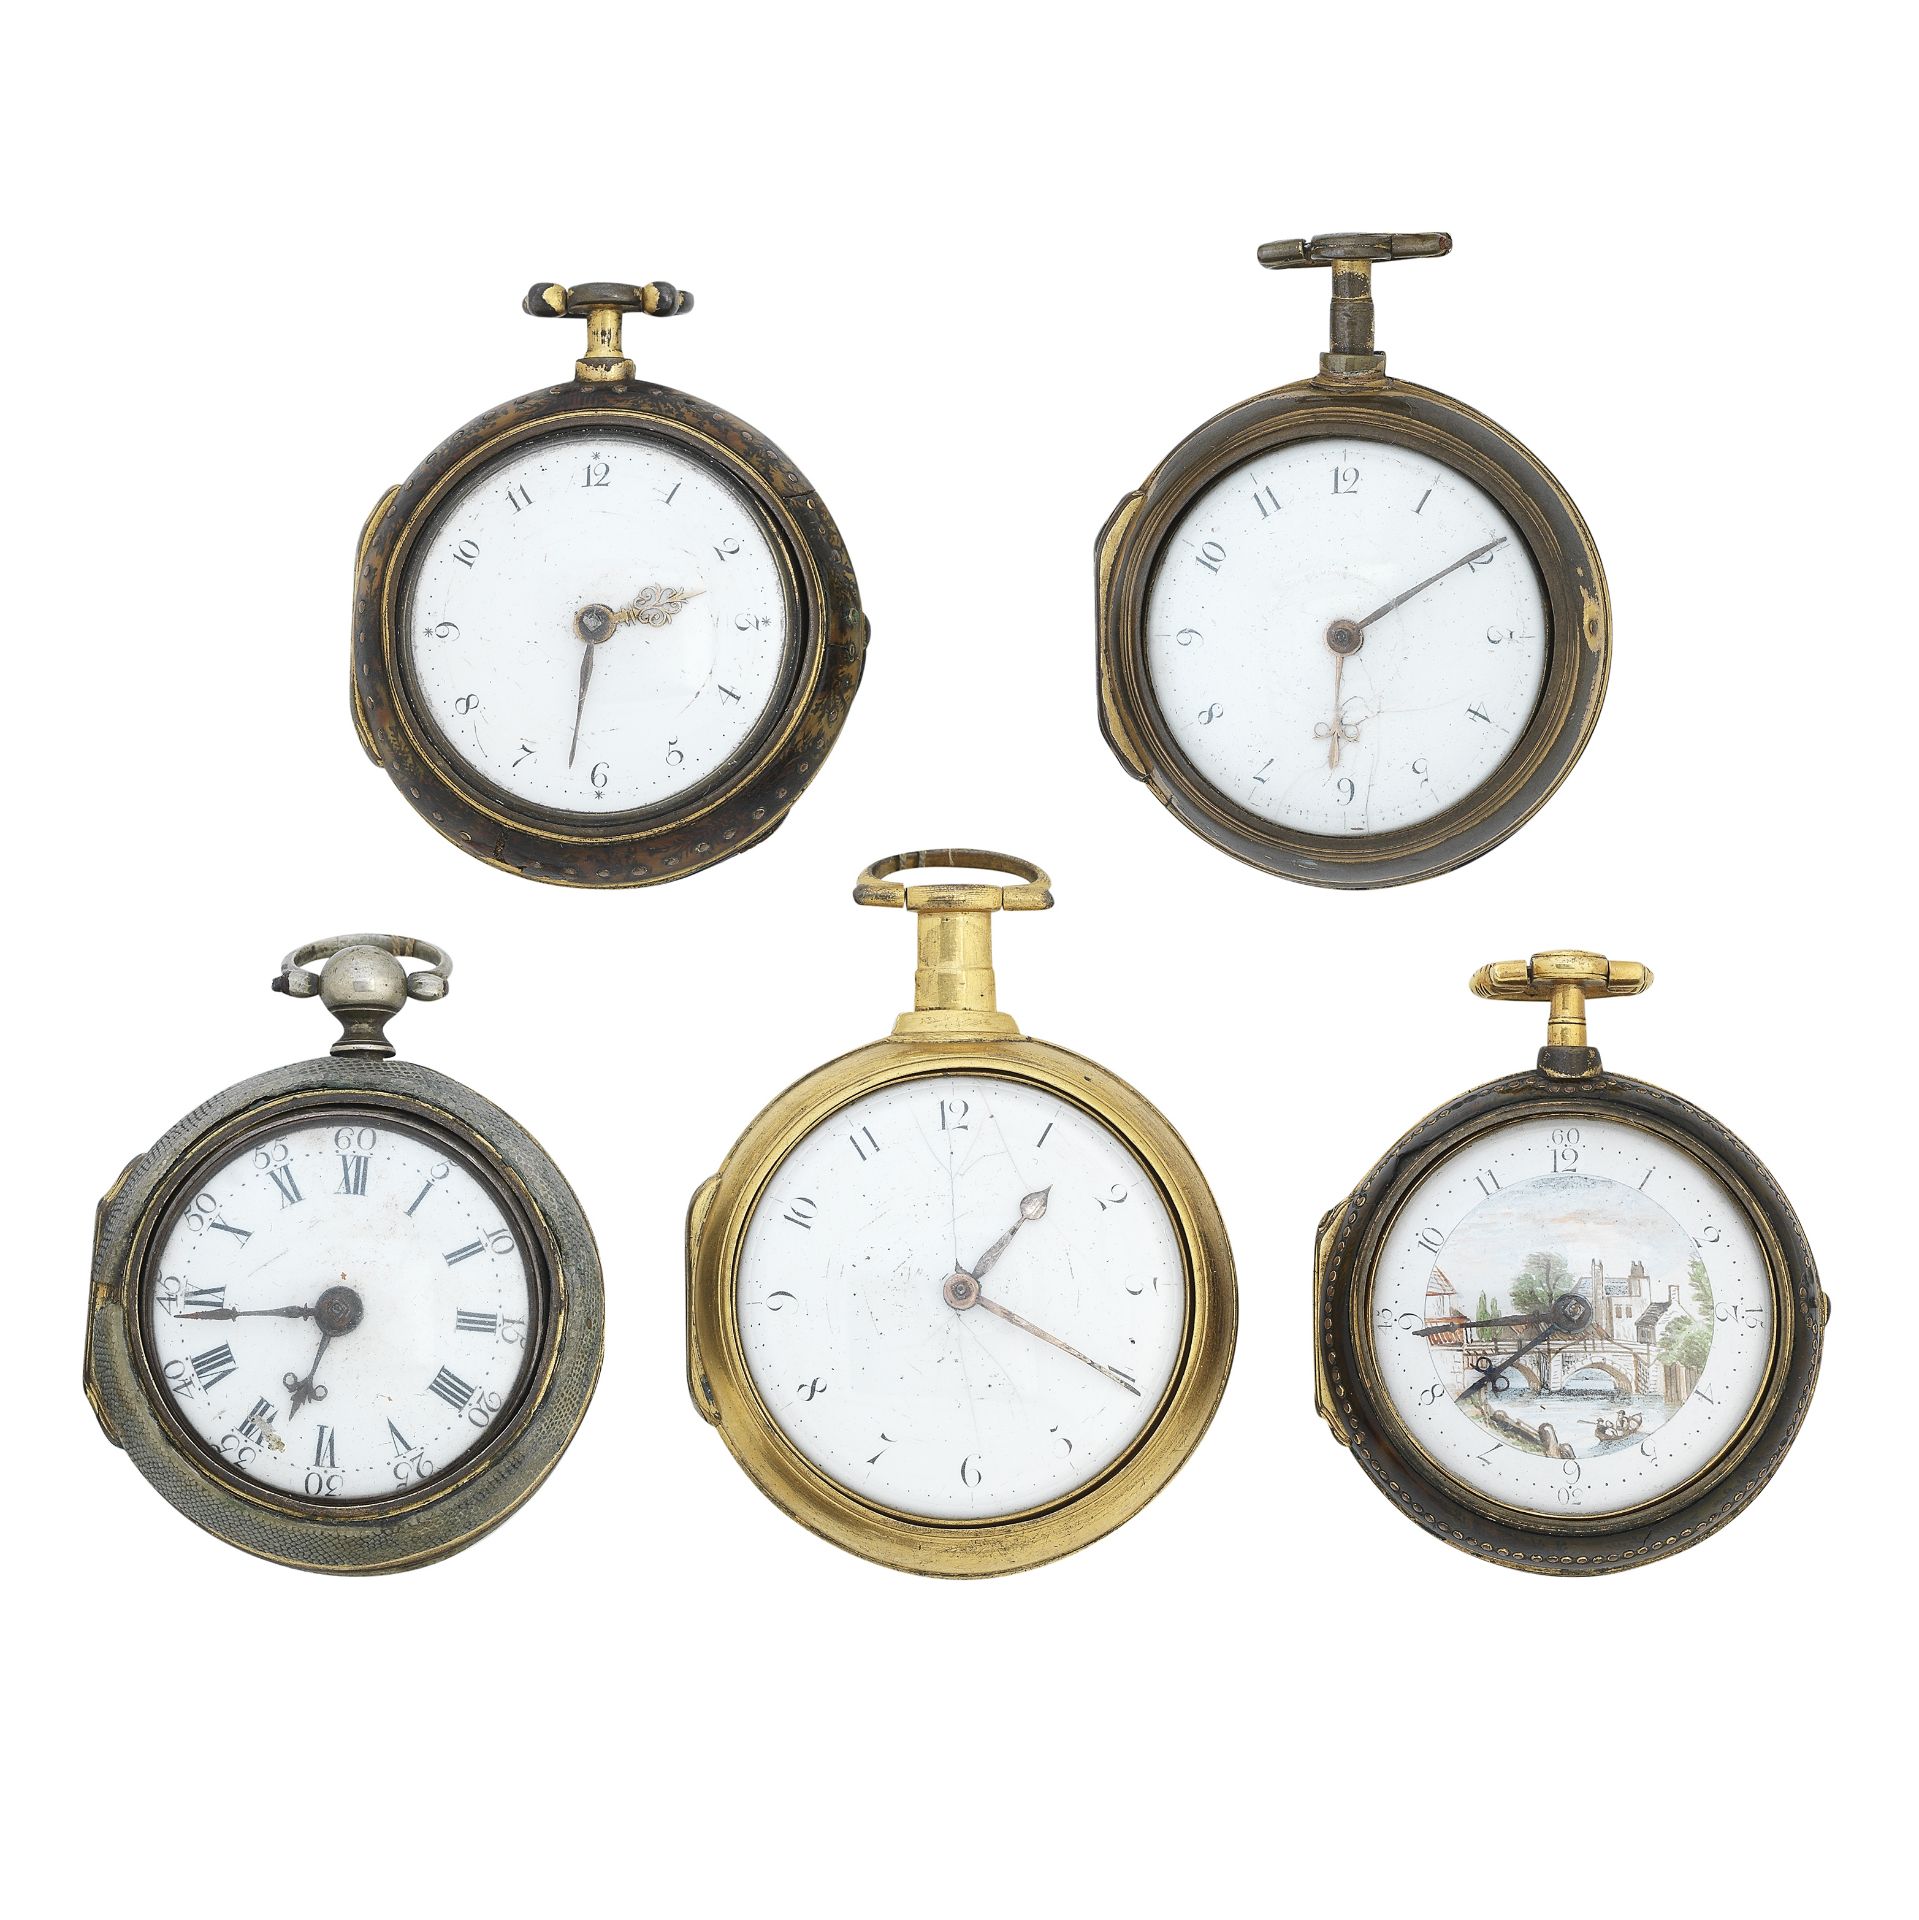 A group of five 18th century pair cased pocket watches